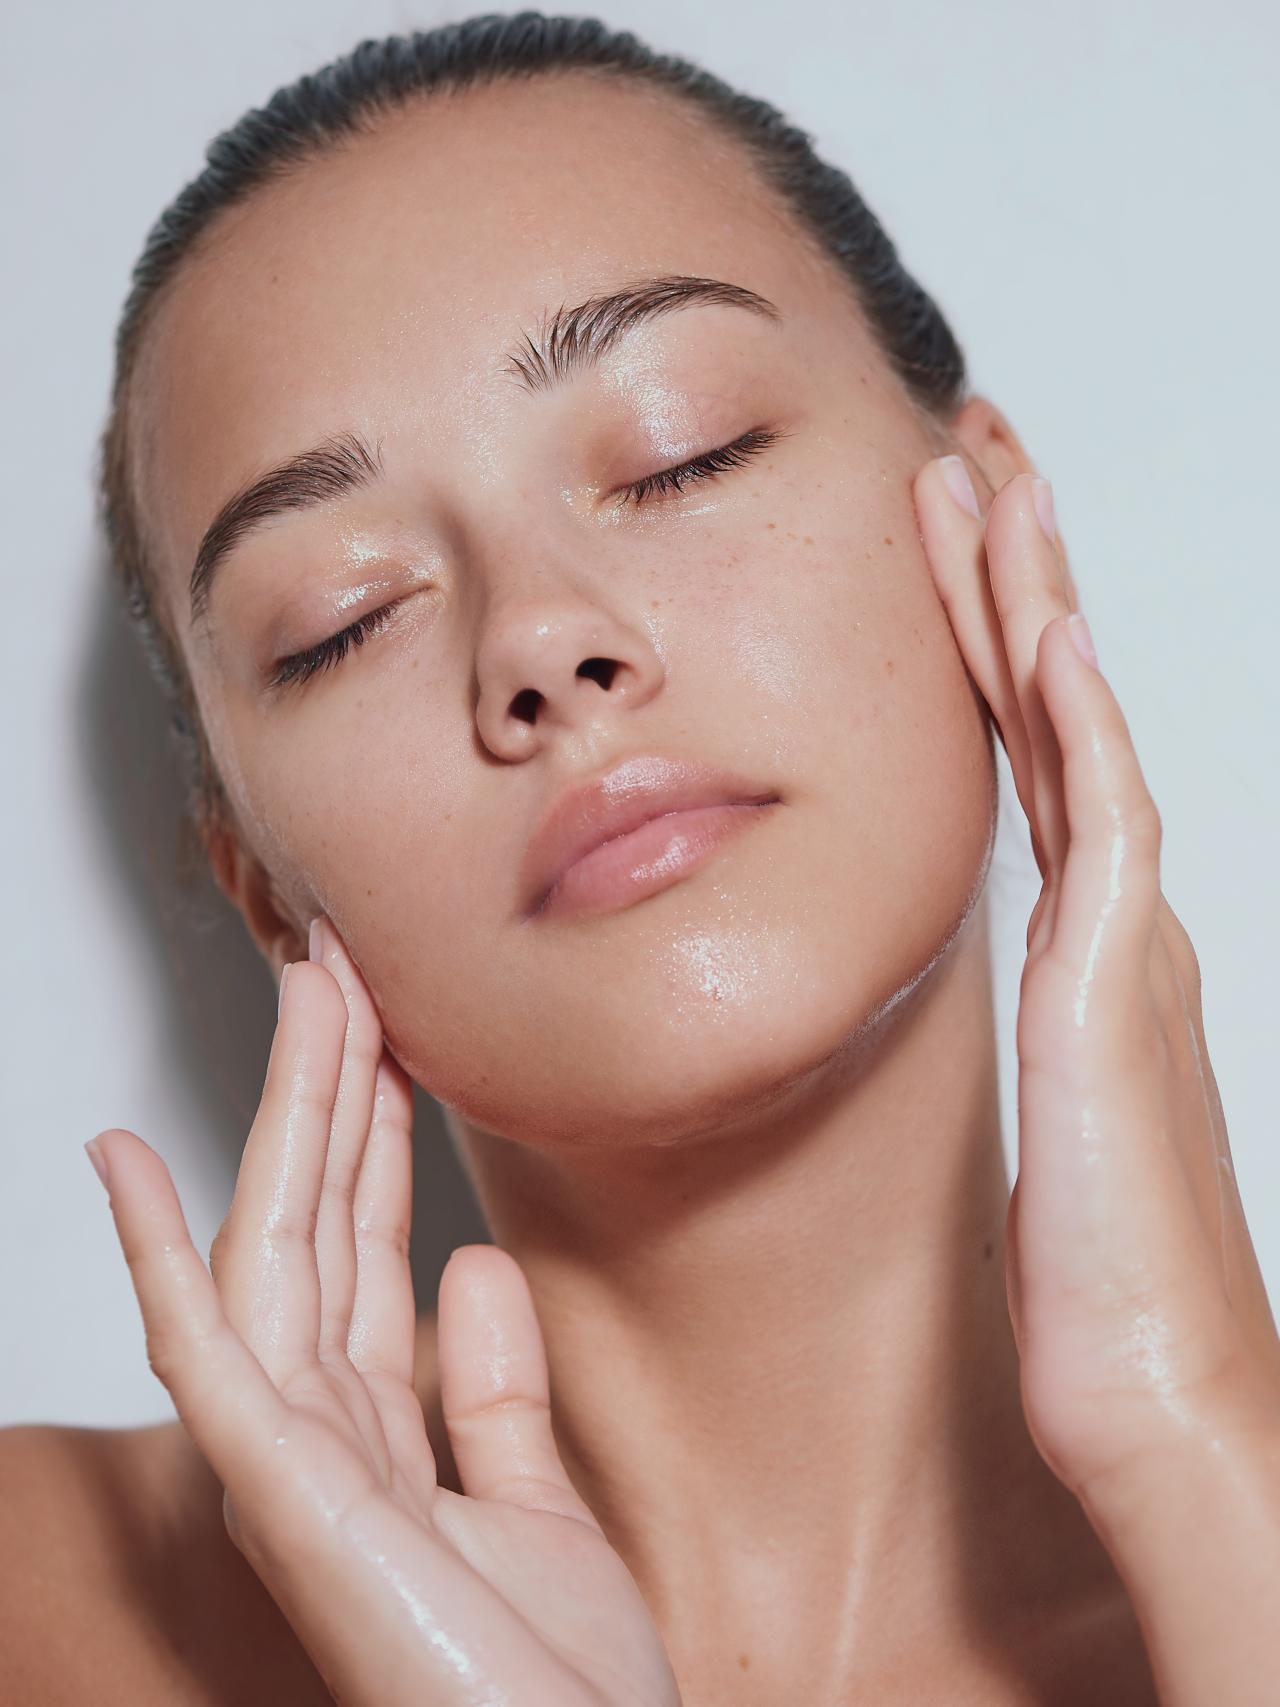 15 Best Skincare Tips from Dermatologists and Experts - Easy Skin Care Tips